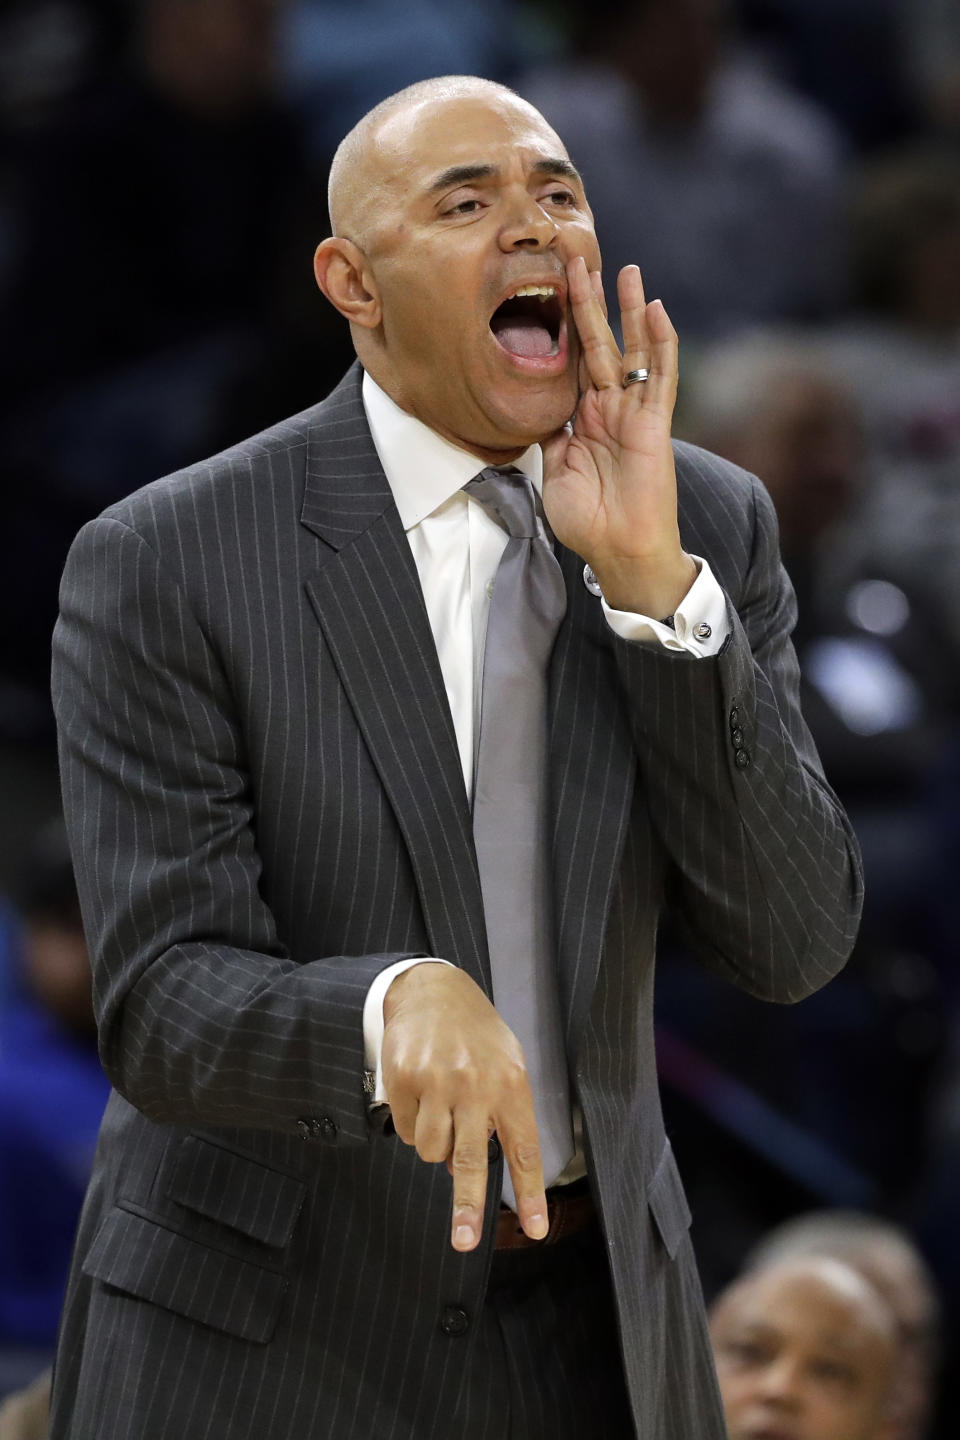 FILE - In this Nov. 15, 2018, file photo, DePaul coach Dave Leitao shouts to his team during the first half of an NCAA college basketball game against Penn State, in Chicago. The NCAA suspended men’s basketball coach Dave Leitao for the first three games of the regular season Tuesday, July 23, 2019, saying he should have done more to prevent recruiting violations by his staff. The NCAA also put the Big East program on three years of probation, issued a $5,000 fine and said an undetermined number of games will be vacated because DePaul put an ineligible player on the floor. An unidentified former associate head coach is also facing a three-year show cause order for his role in the violations. (AP Photo/Nam Y. Huh, FIle)